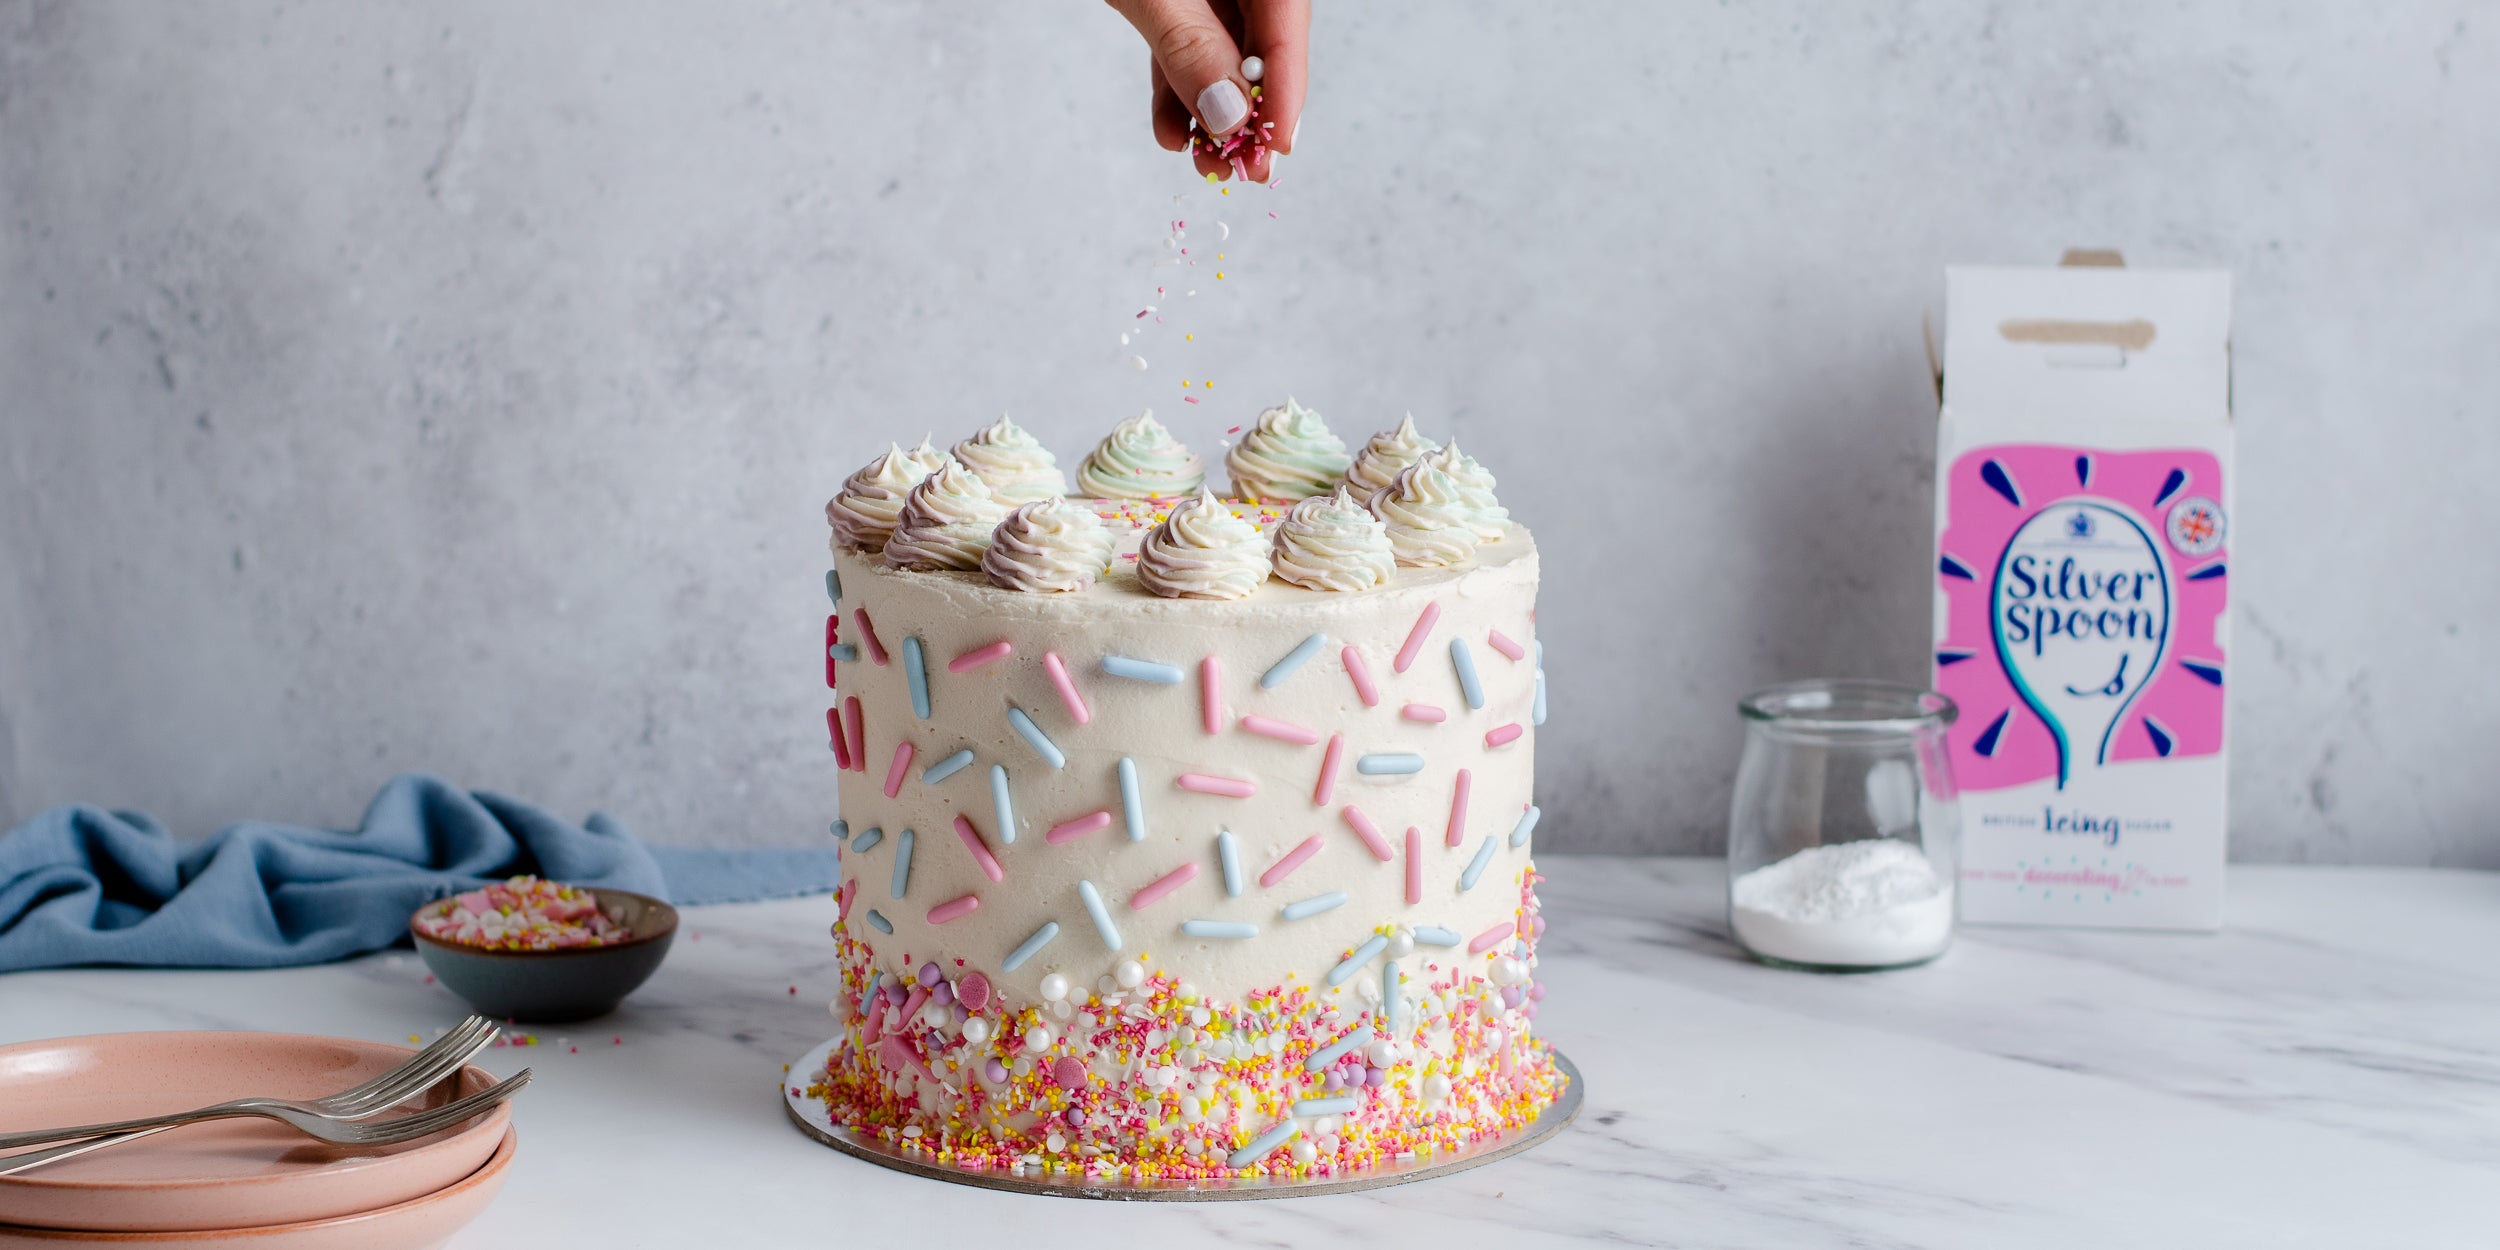 Sponge cake coated in buttercream and rainbow sprinkles. Hand above adding sprinkles. Icing sugar pack to the side. Plates and crockery to the left